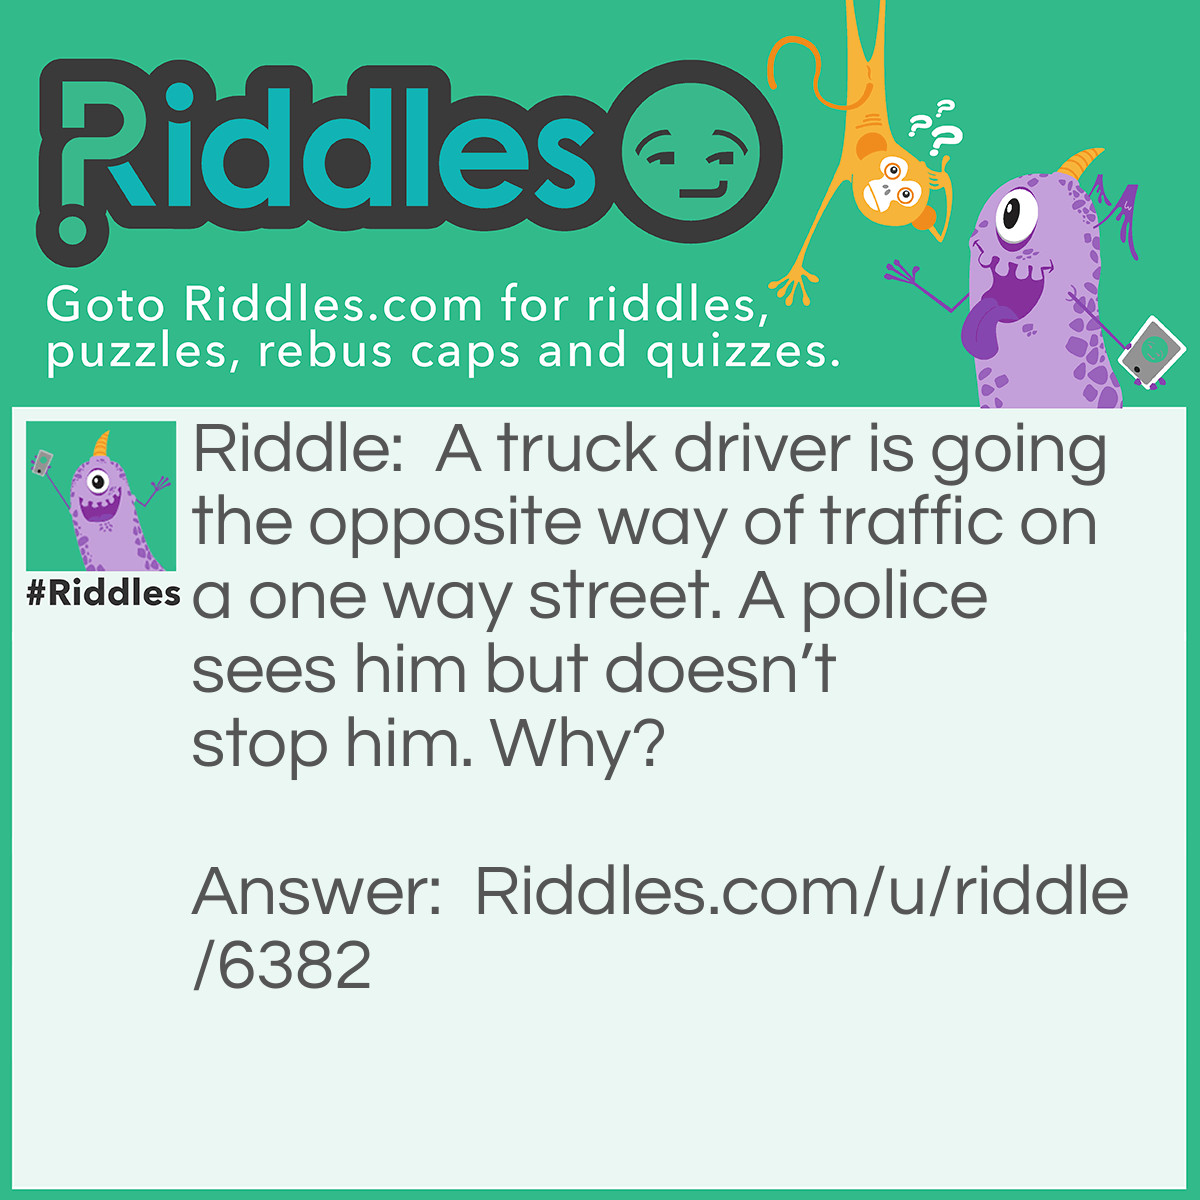 Riddle: A truck driver is going the opposite way of traffic on a one way street. A police sees him but doesn't stop him. Why? Answer: The truck driver was walking.